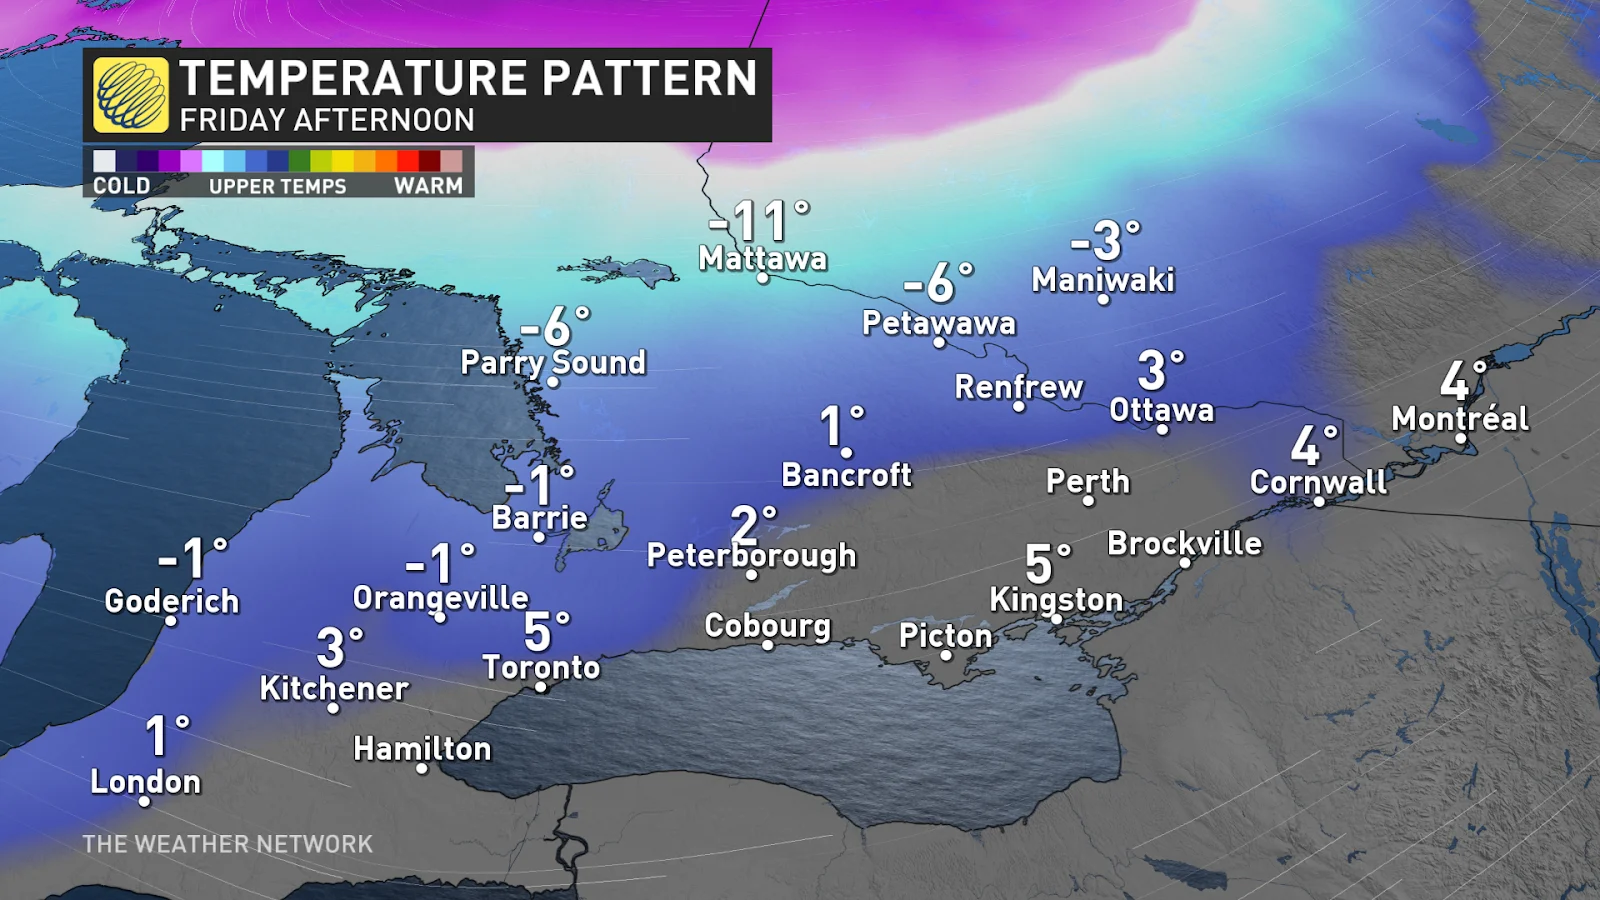 Ontario temps Friday afternoon